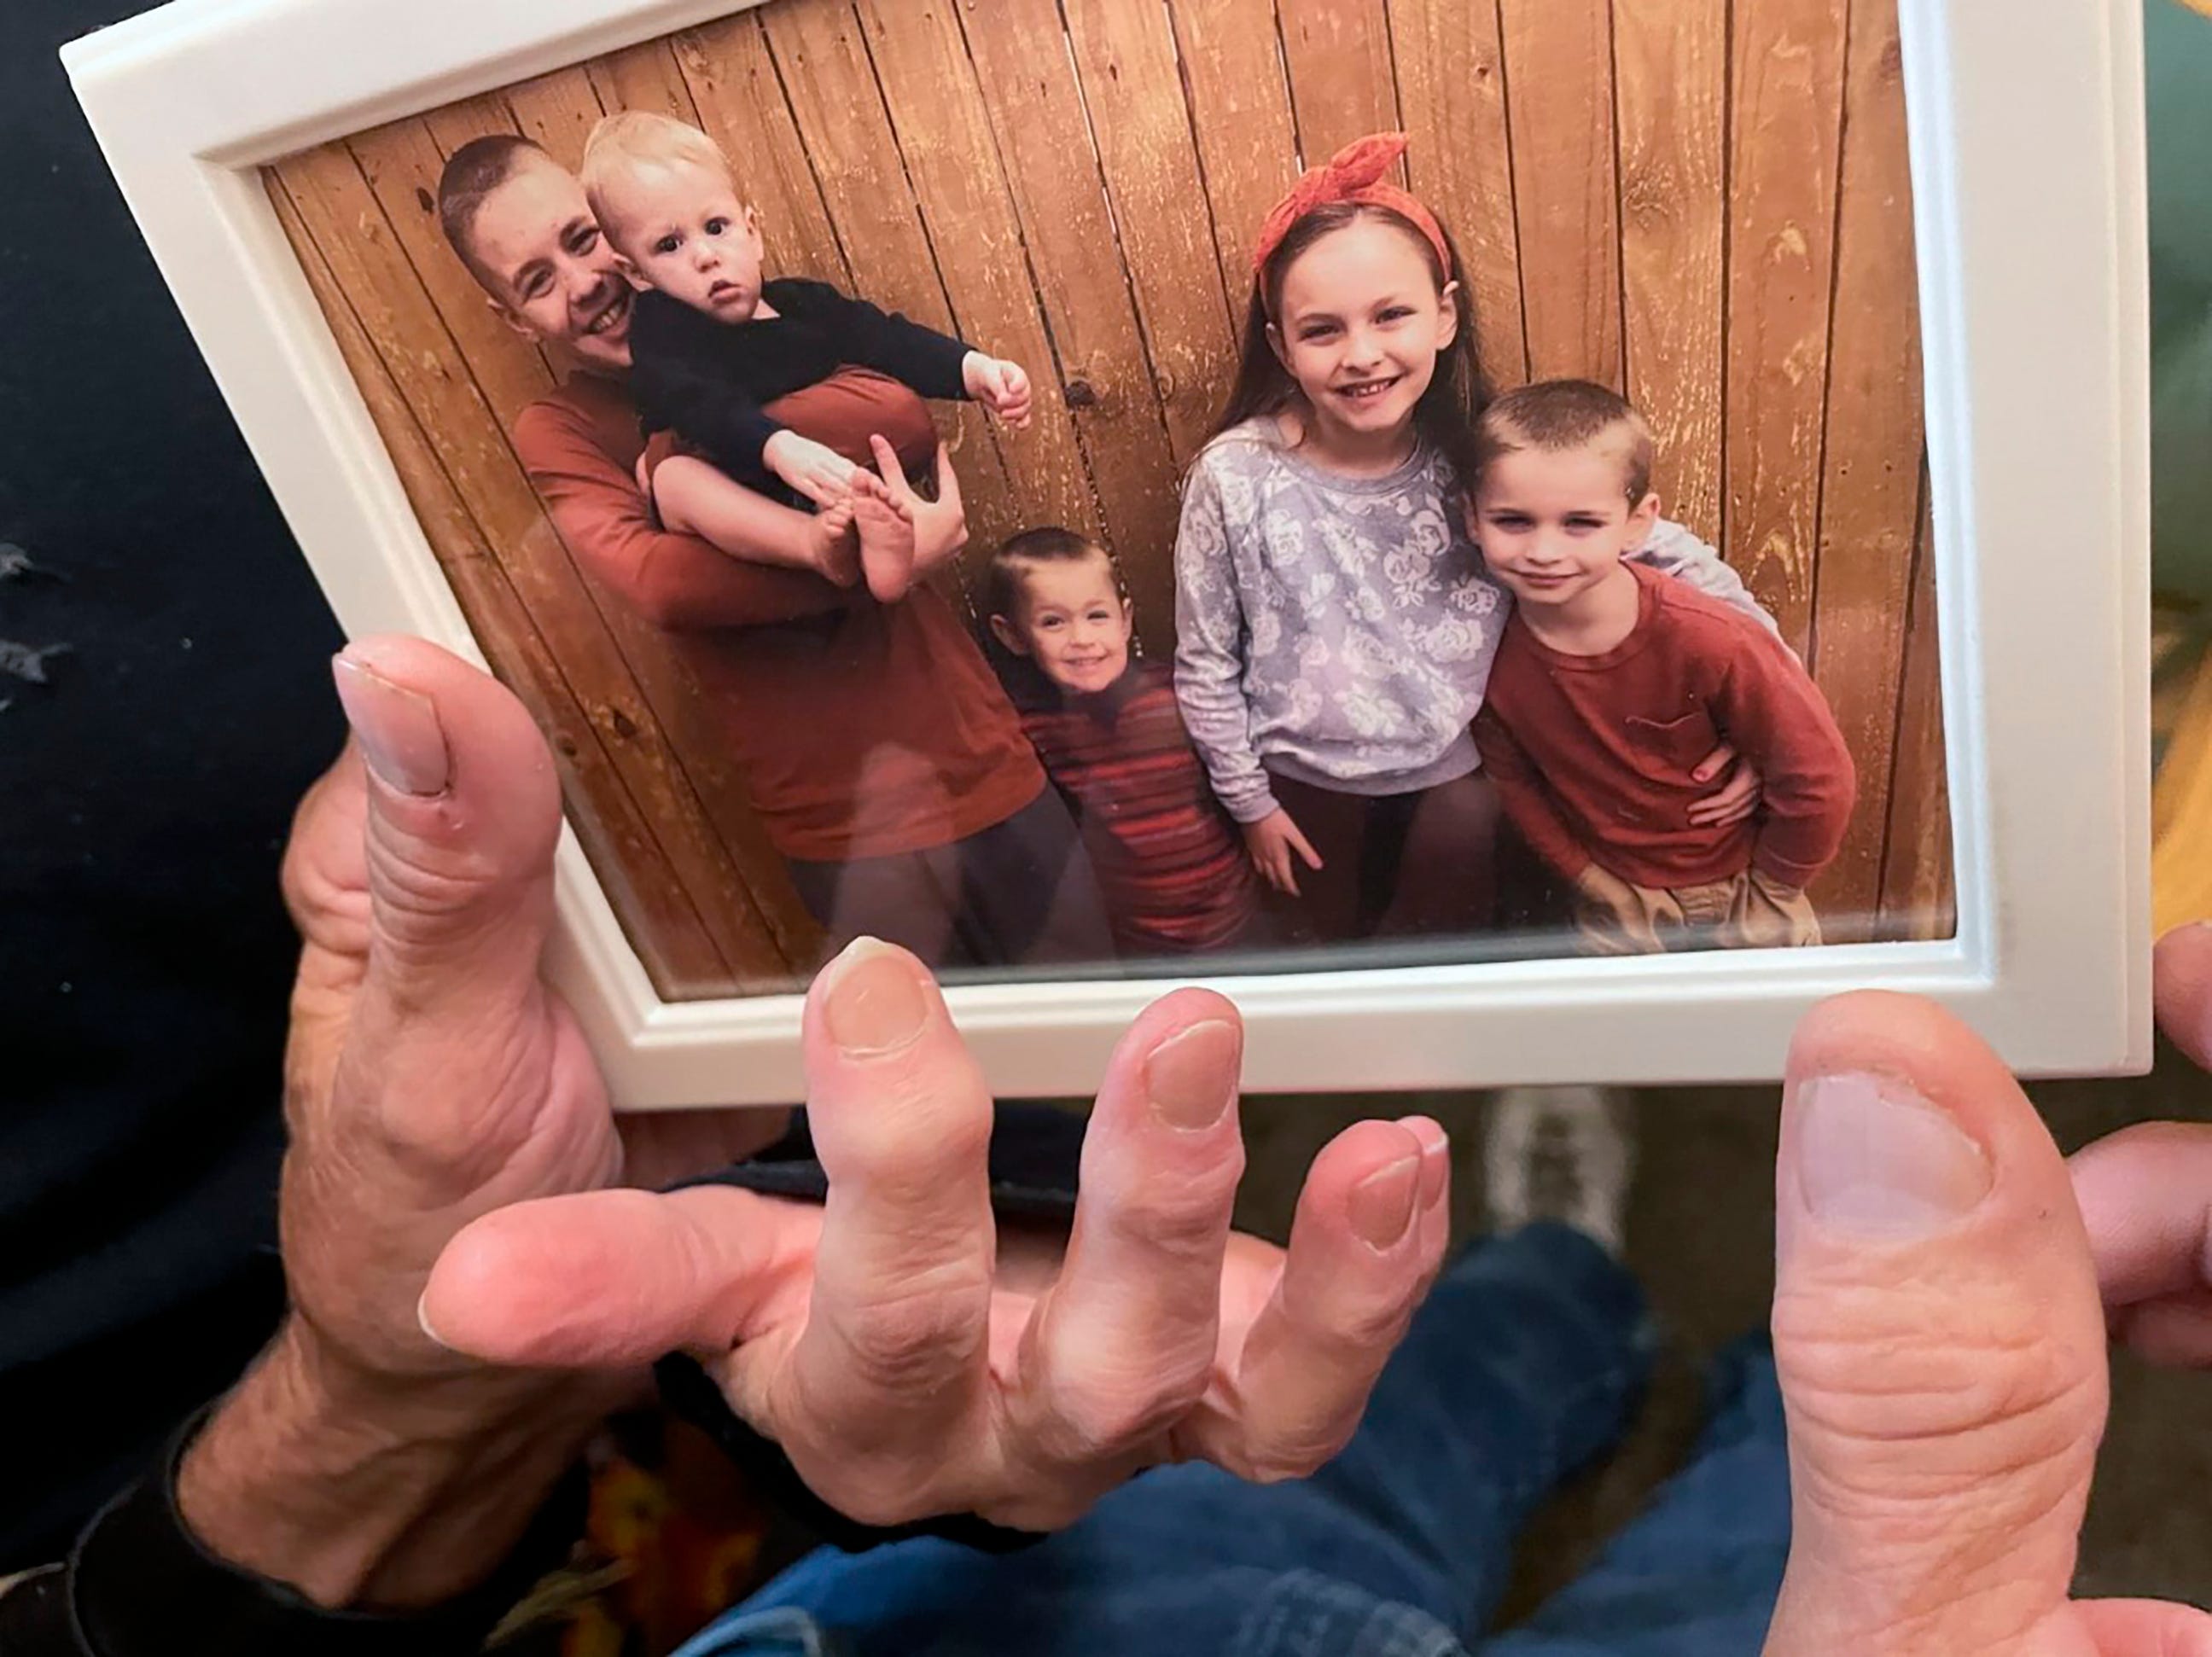 Six children died in a suspected murder-suicide by their parents, Brian and Brittney Nelson, in Tulsa, Oklahoma last October. Five of them appear in a photo at their grandparents' house: Brian, Kurgan, Ragnar, Brantley and Vegeta.